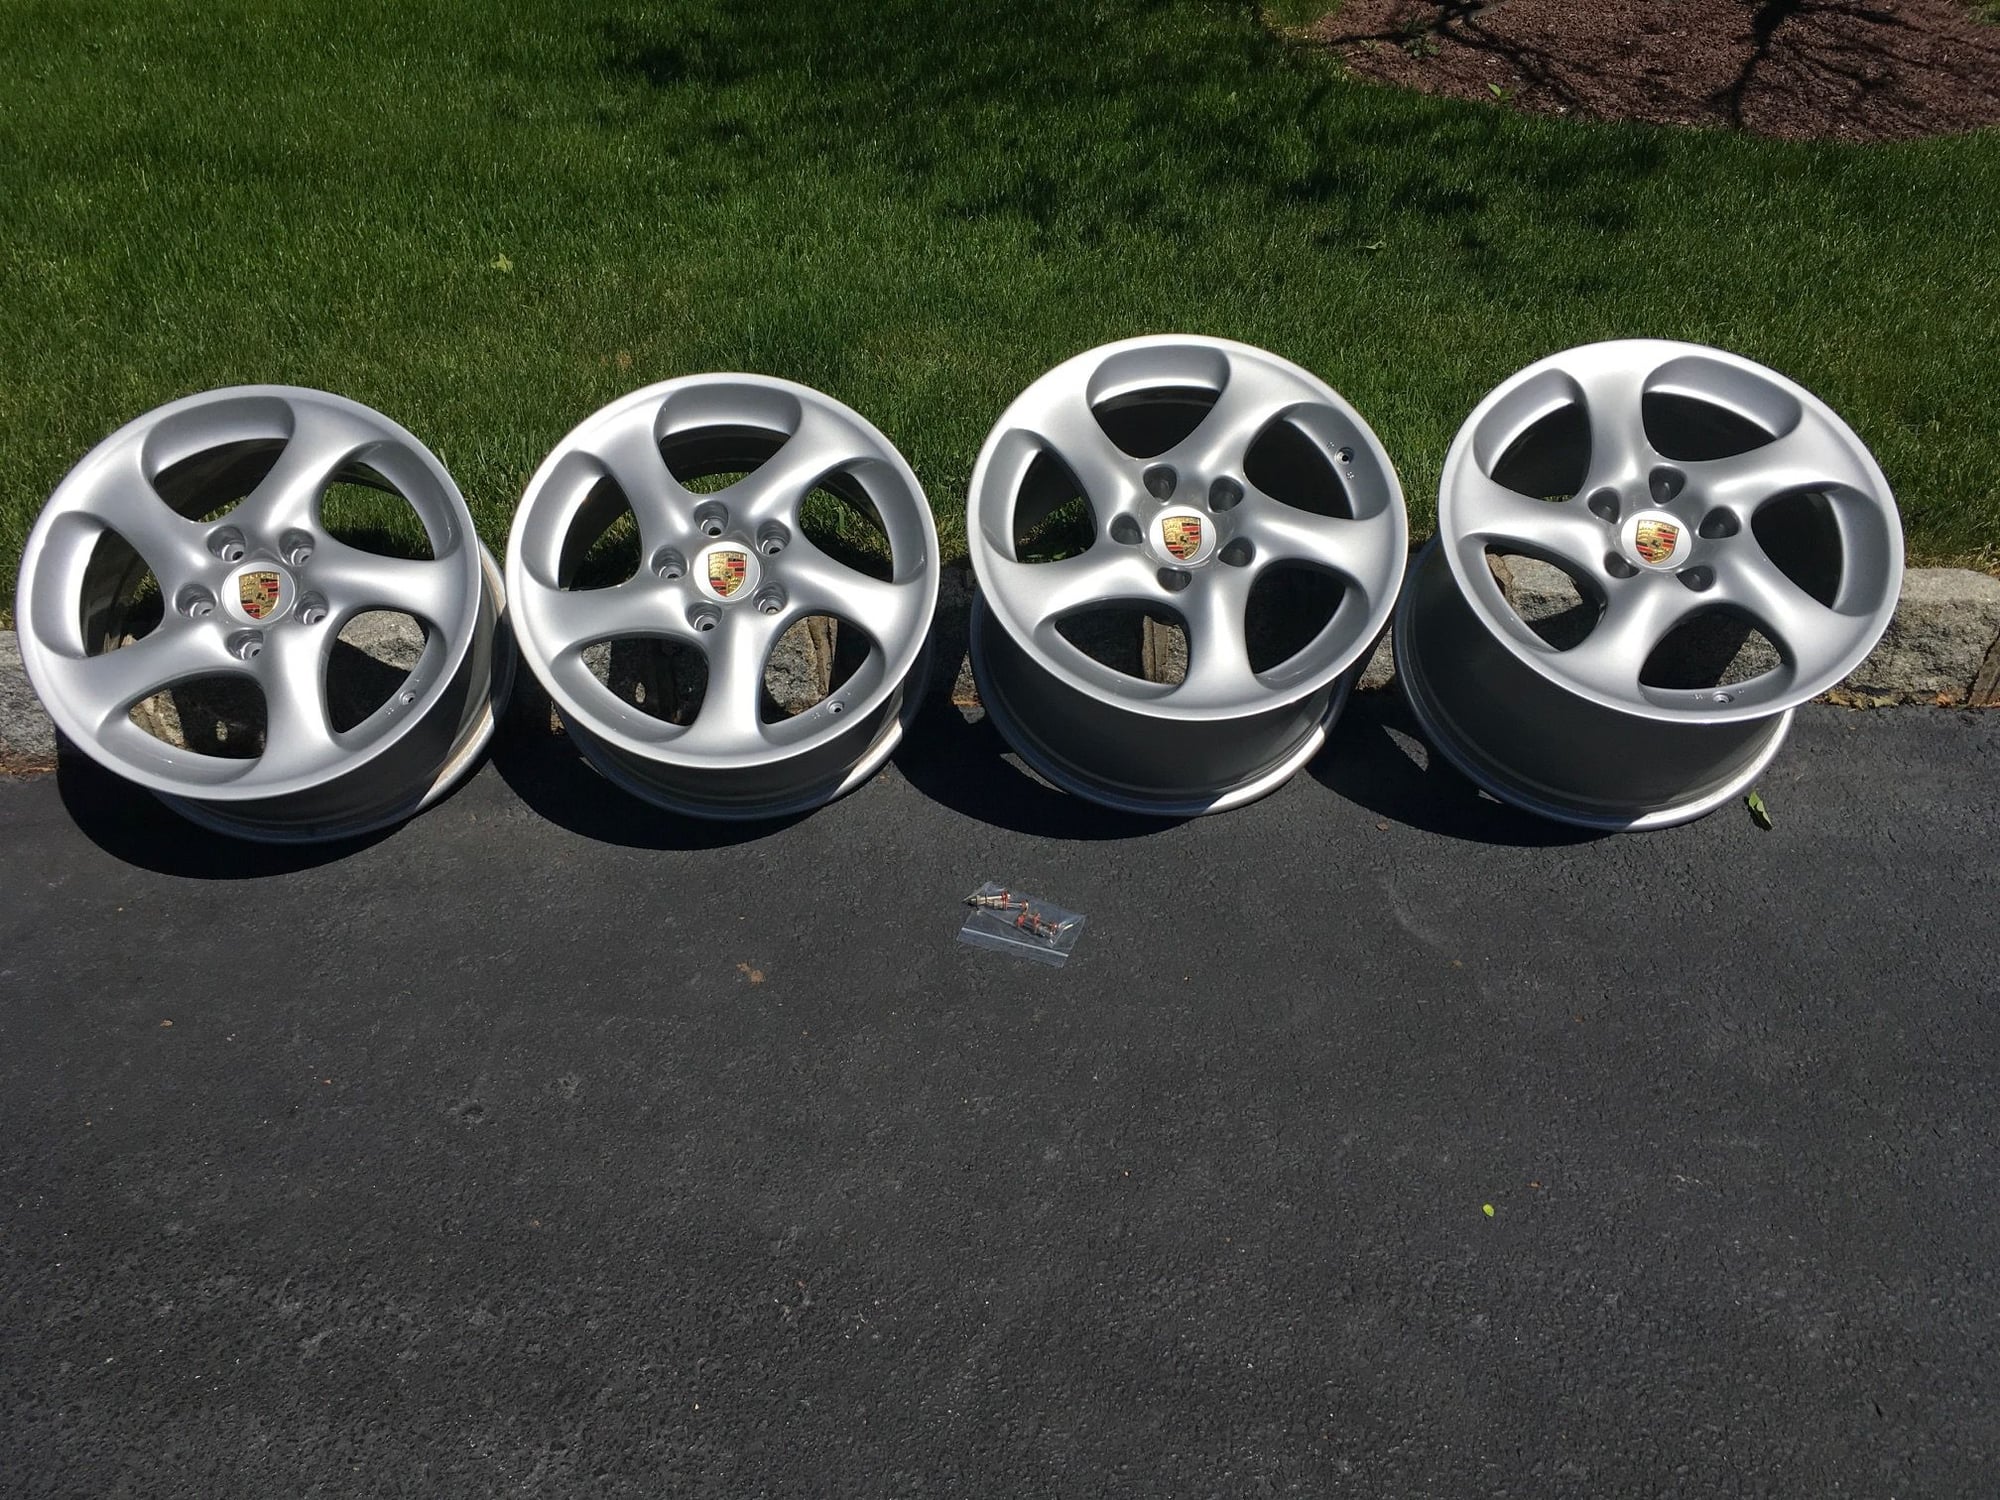 Wheels and Tires/Axles -  - Used - 1996 to 2005 Porsche 911 - Hillsborough, NJ 08844, United States